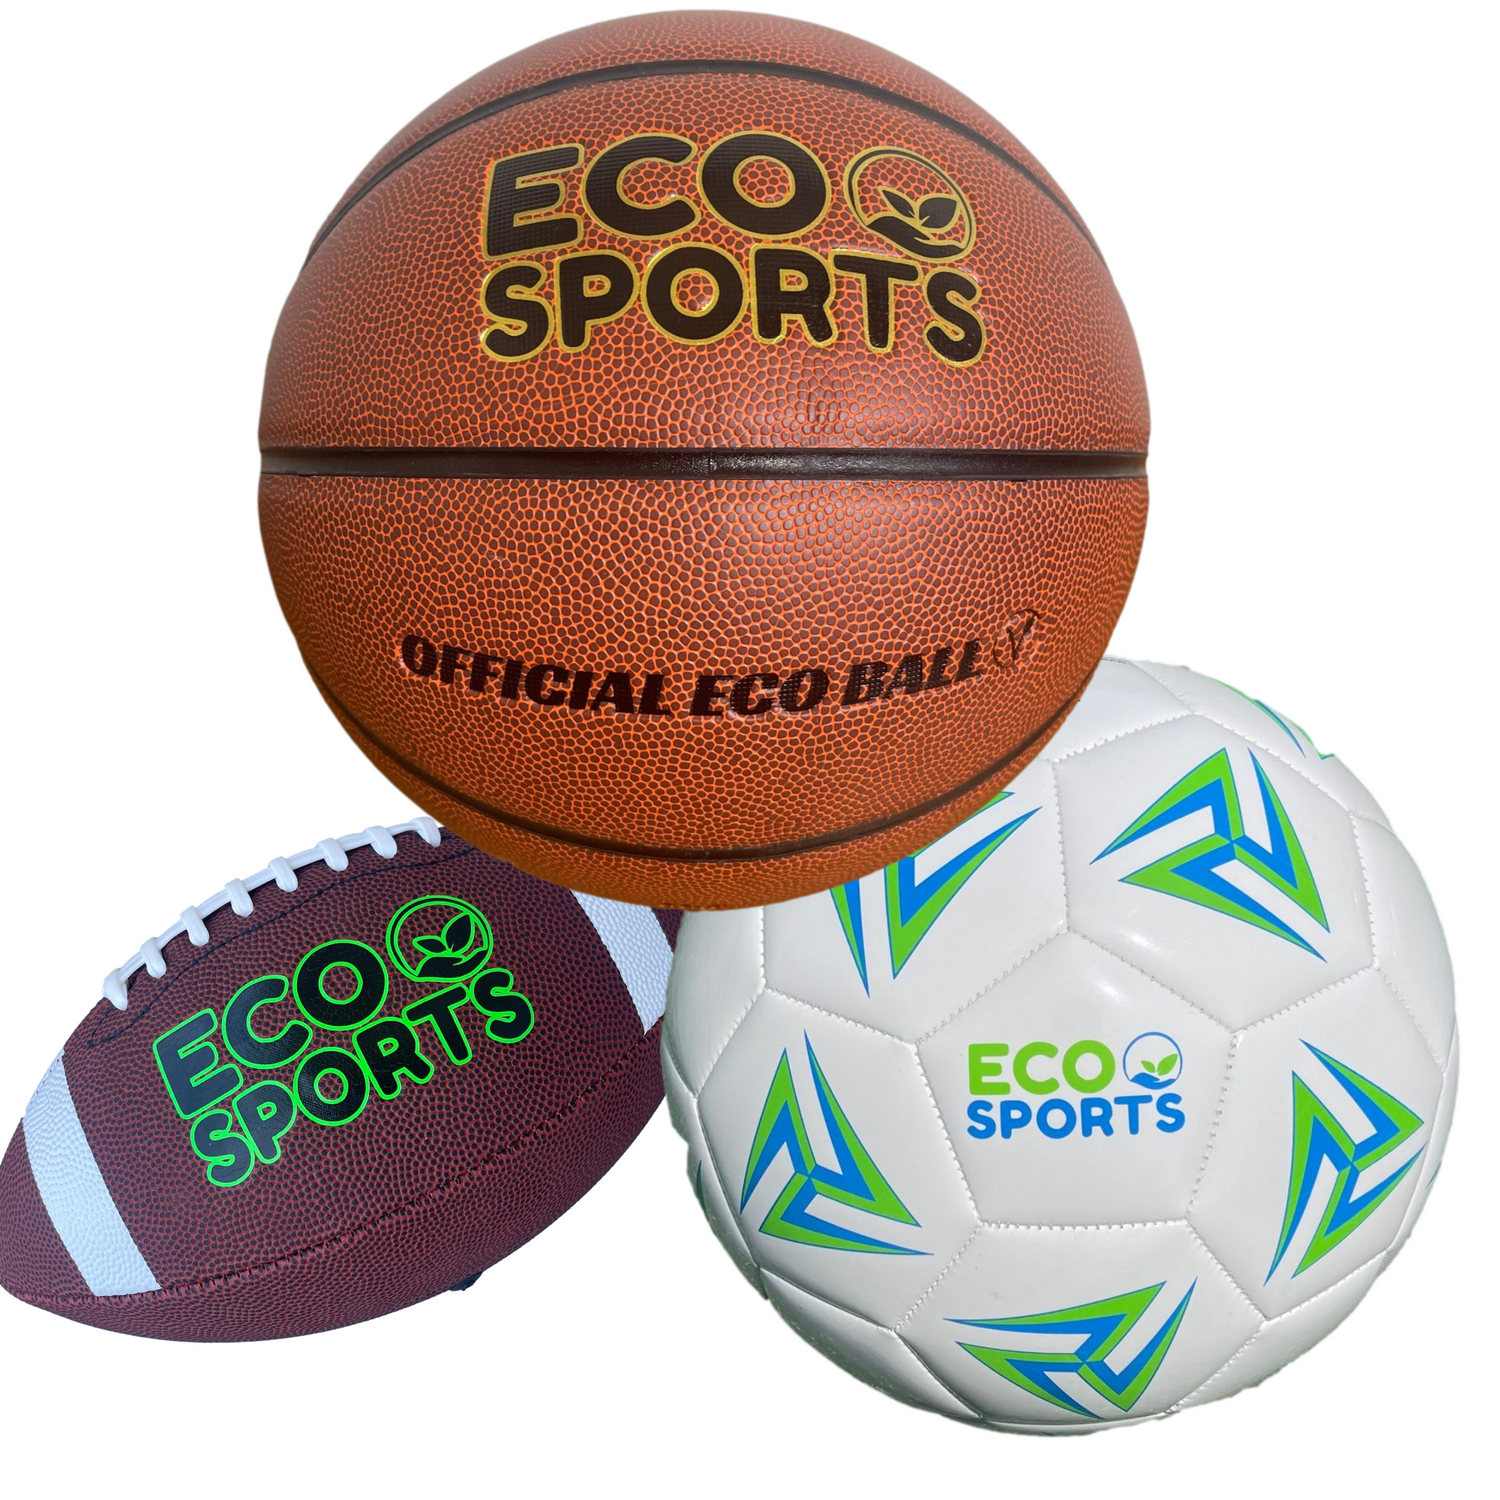 Make a Positive Impact with Eco Sports